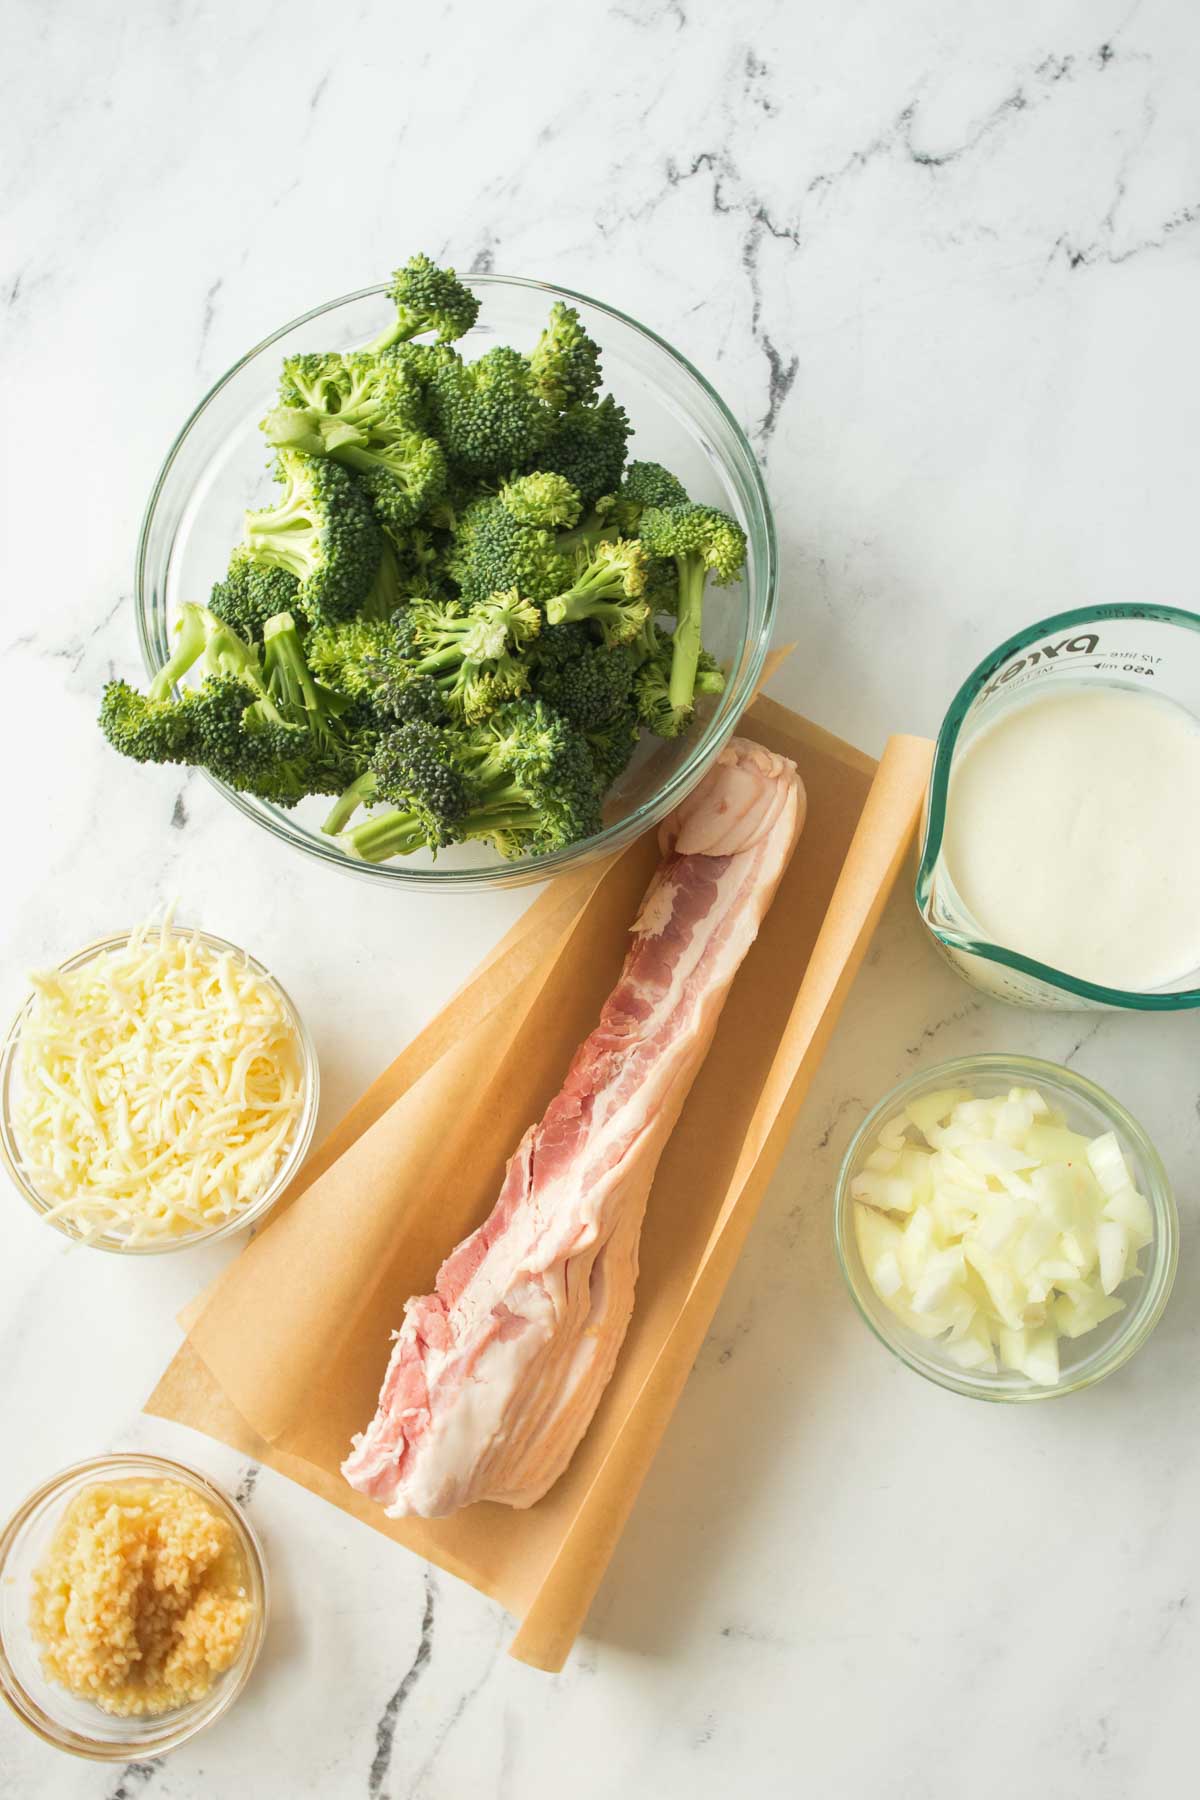 Ingredients to make bacon and broccoli in creamy garlic sauce